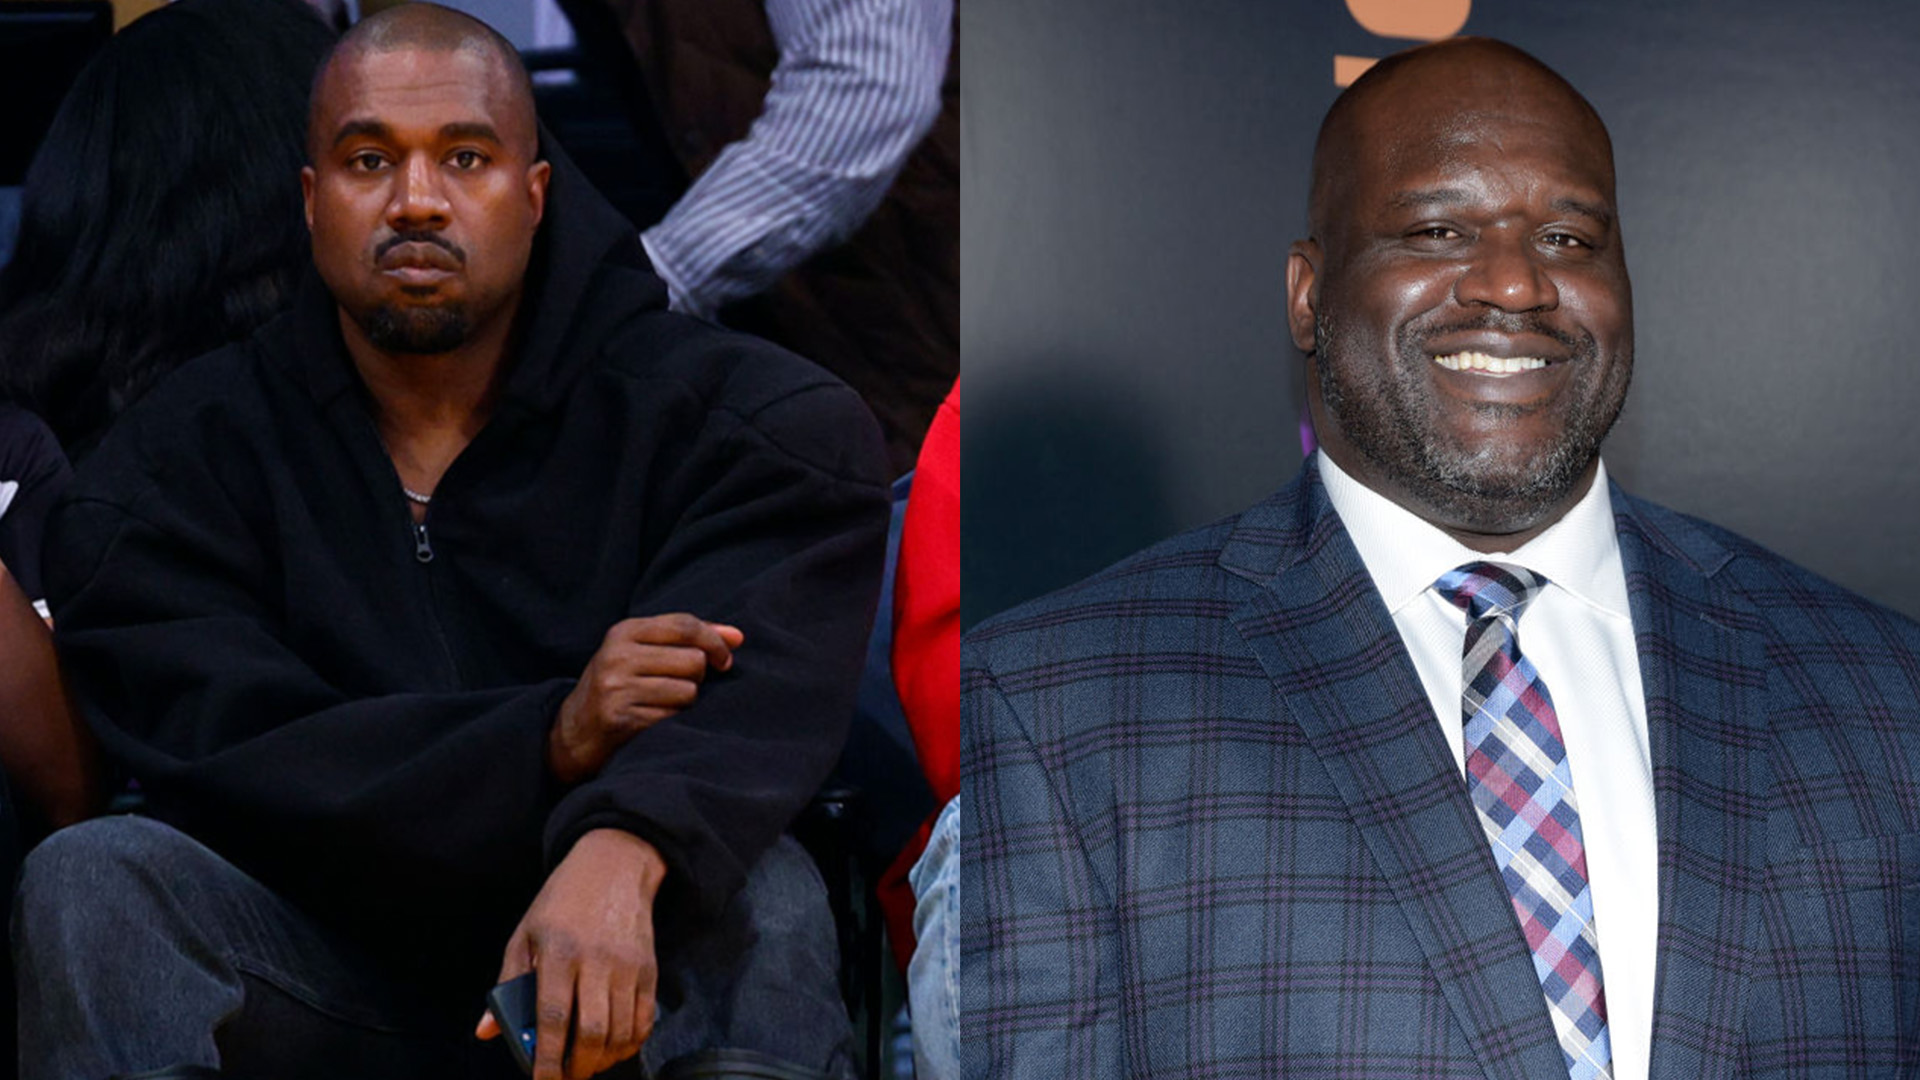 'Worry About Your Business' — Shaquille O'Neal Responds After Kanye West Tweets About His Business Partner